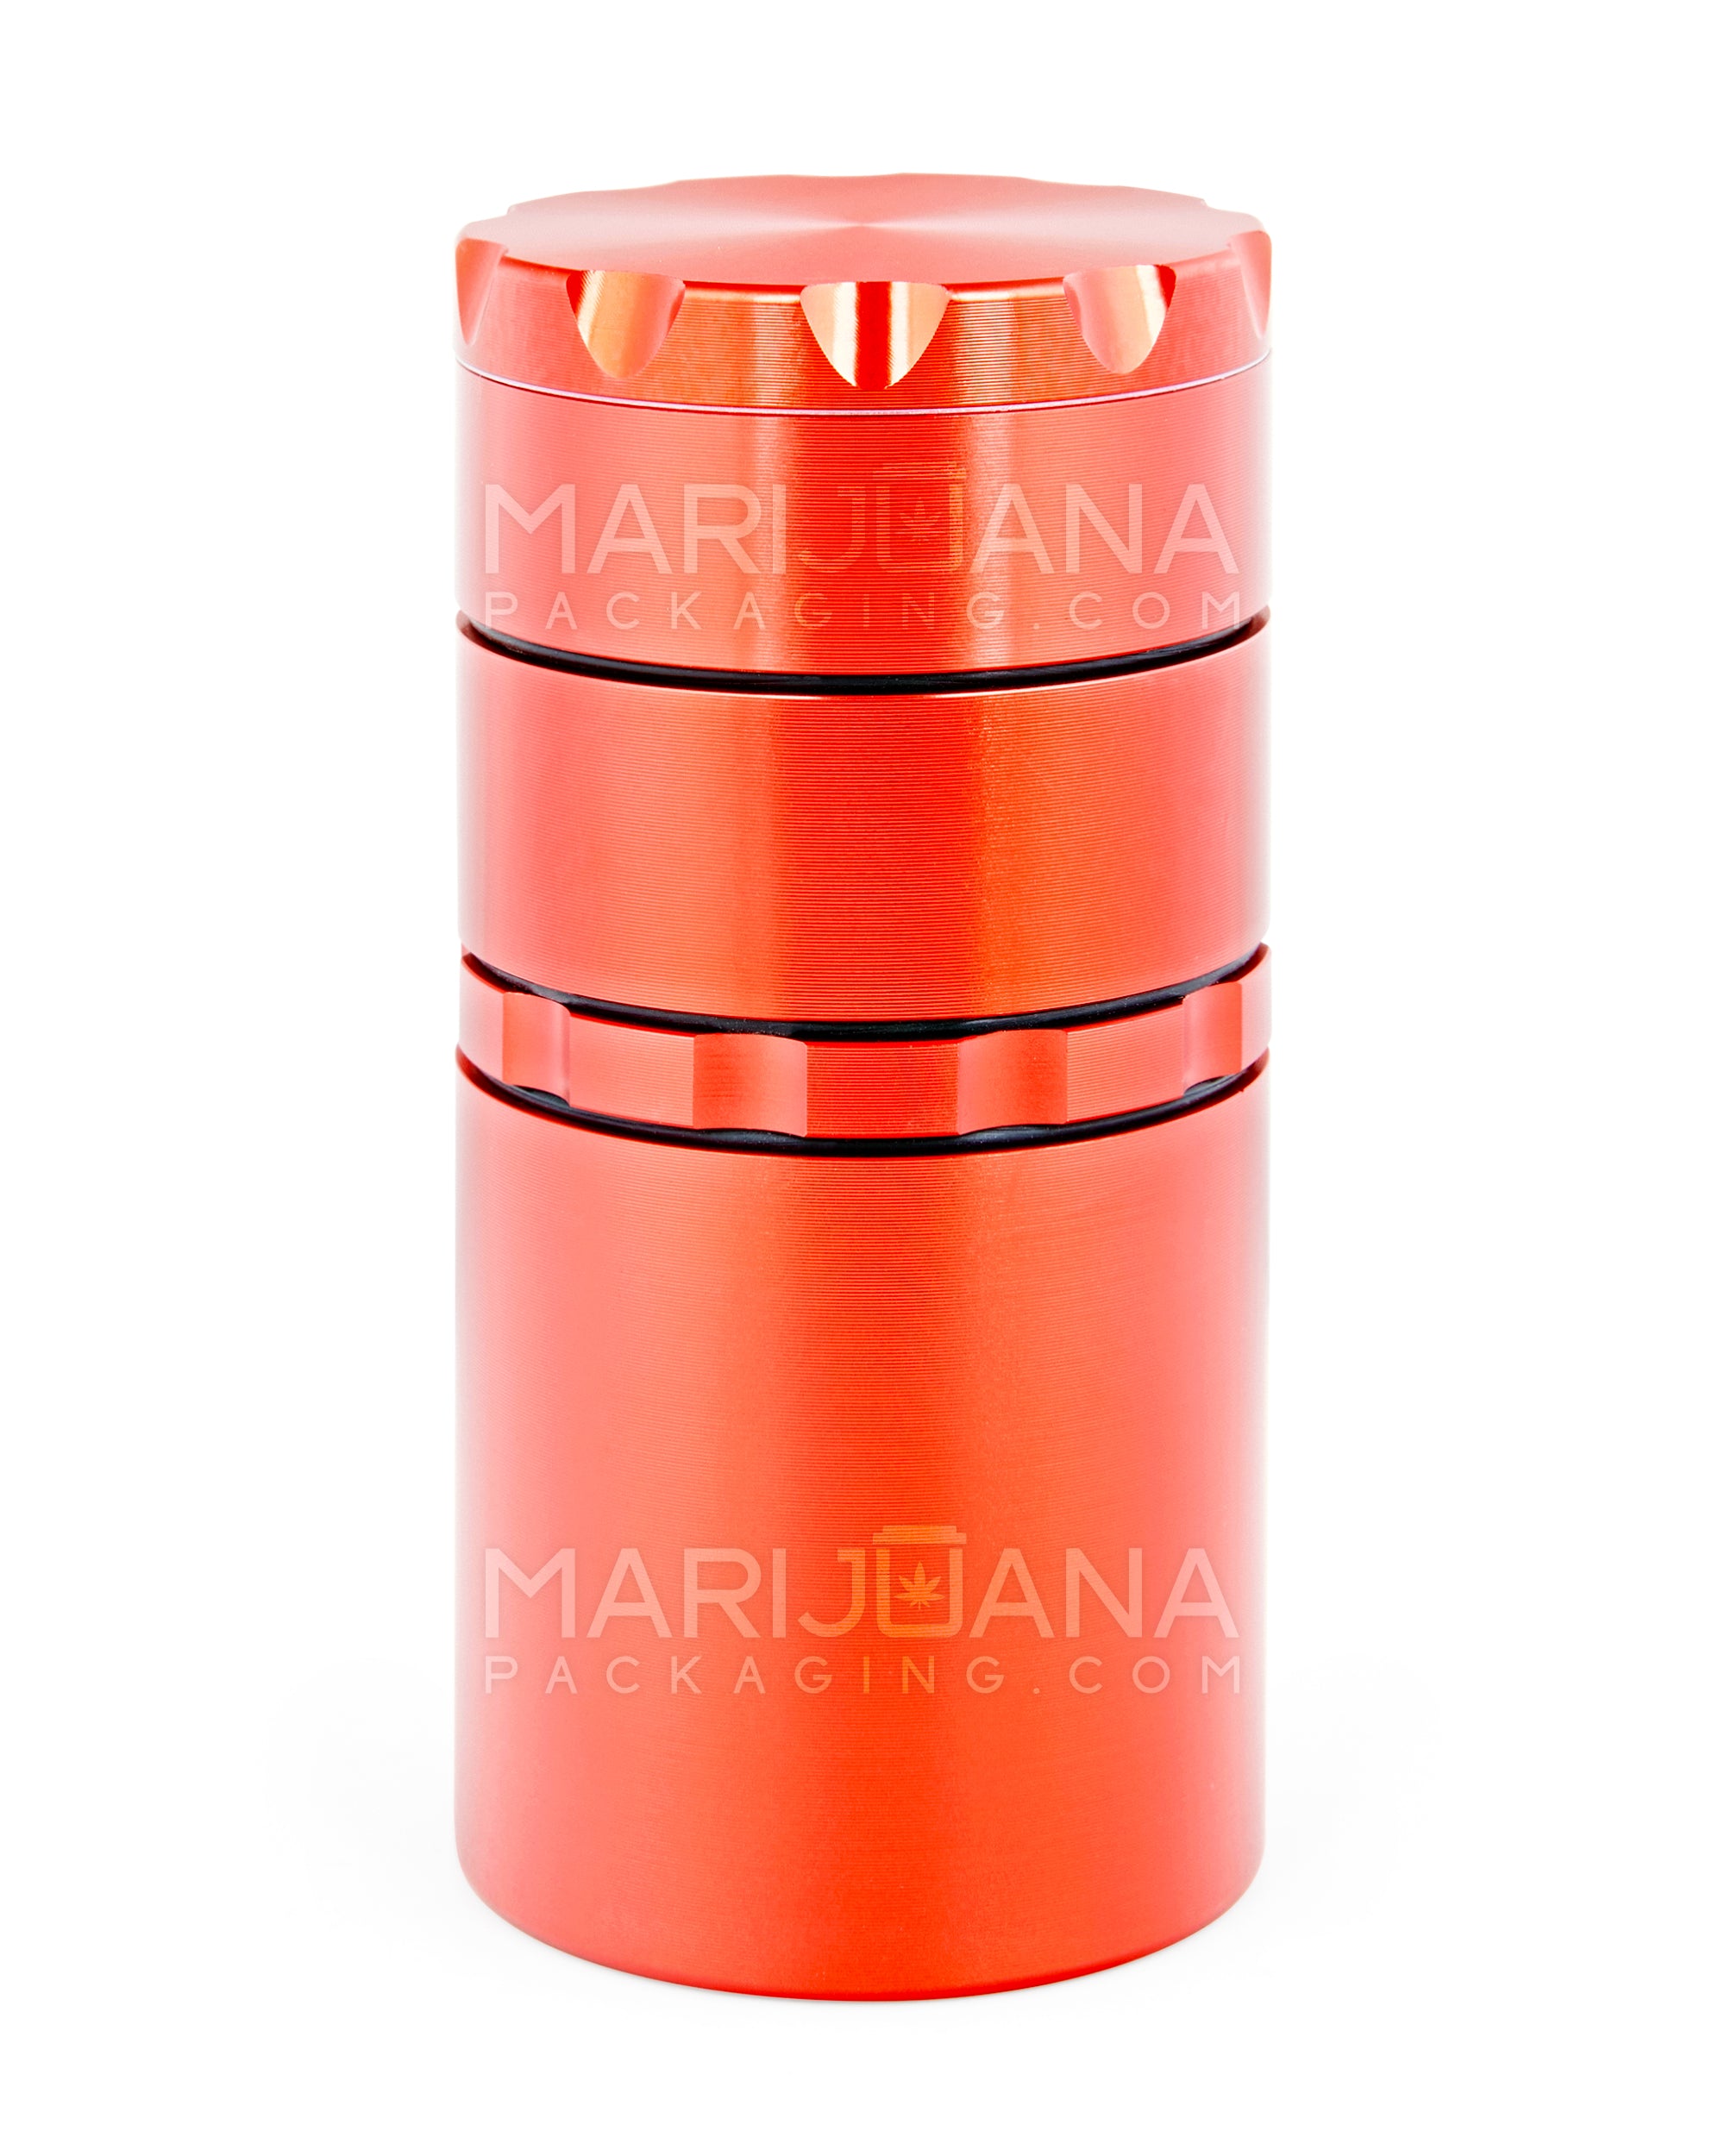 Multi Compartment Metal Grinder w/ Catcher | 5 Piece - 50mm - Red